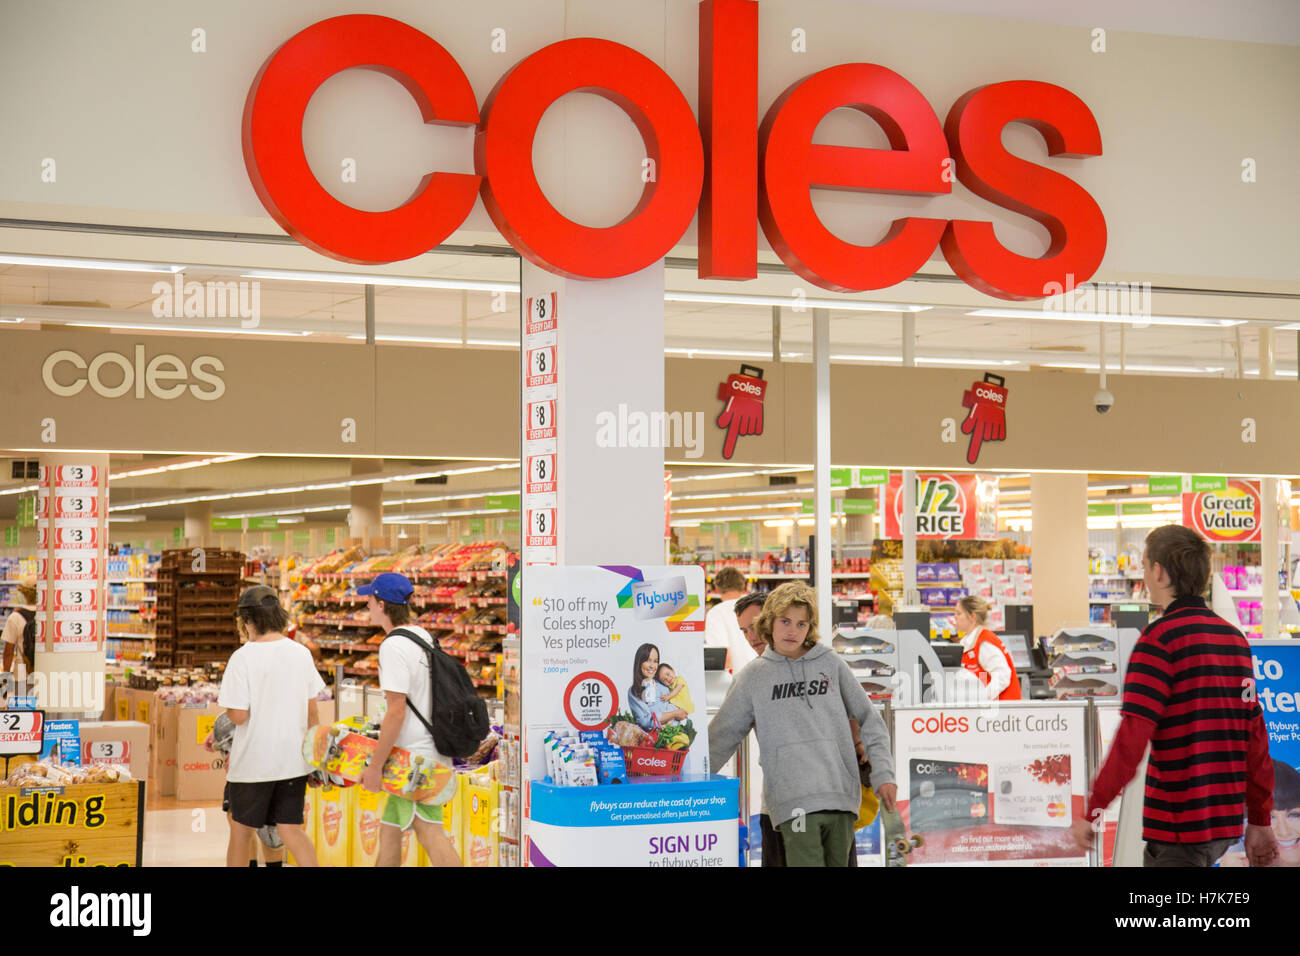 Entrance to Coles supermarket store in Warriewood Sydney,Australia with young boys teenagers shopping Stock Photo